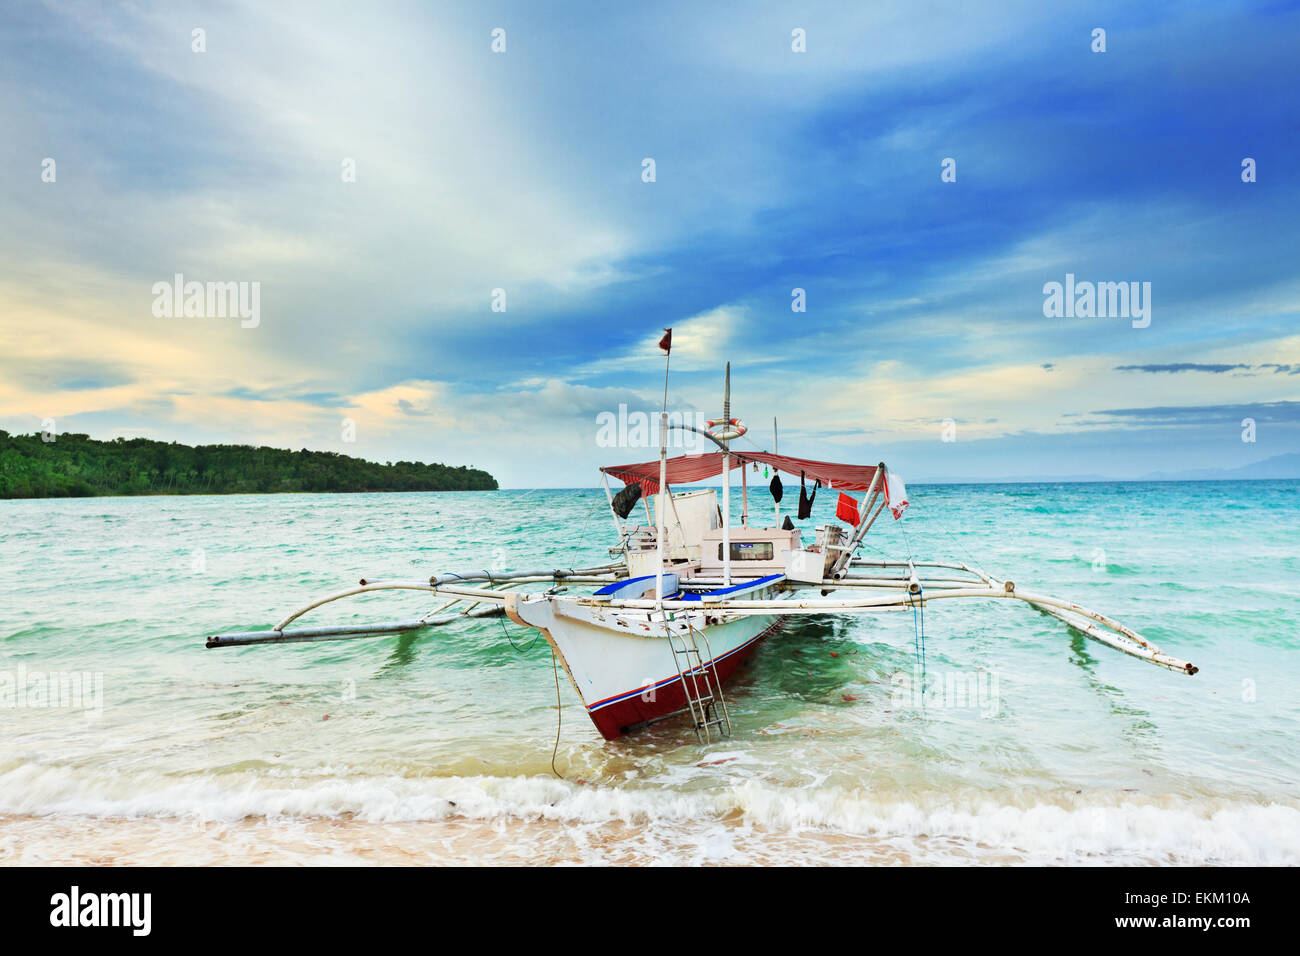 Traditional Philippine boat in the tropical lagoon Stock Photo